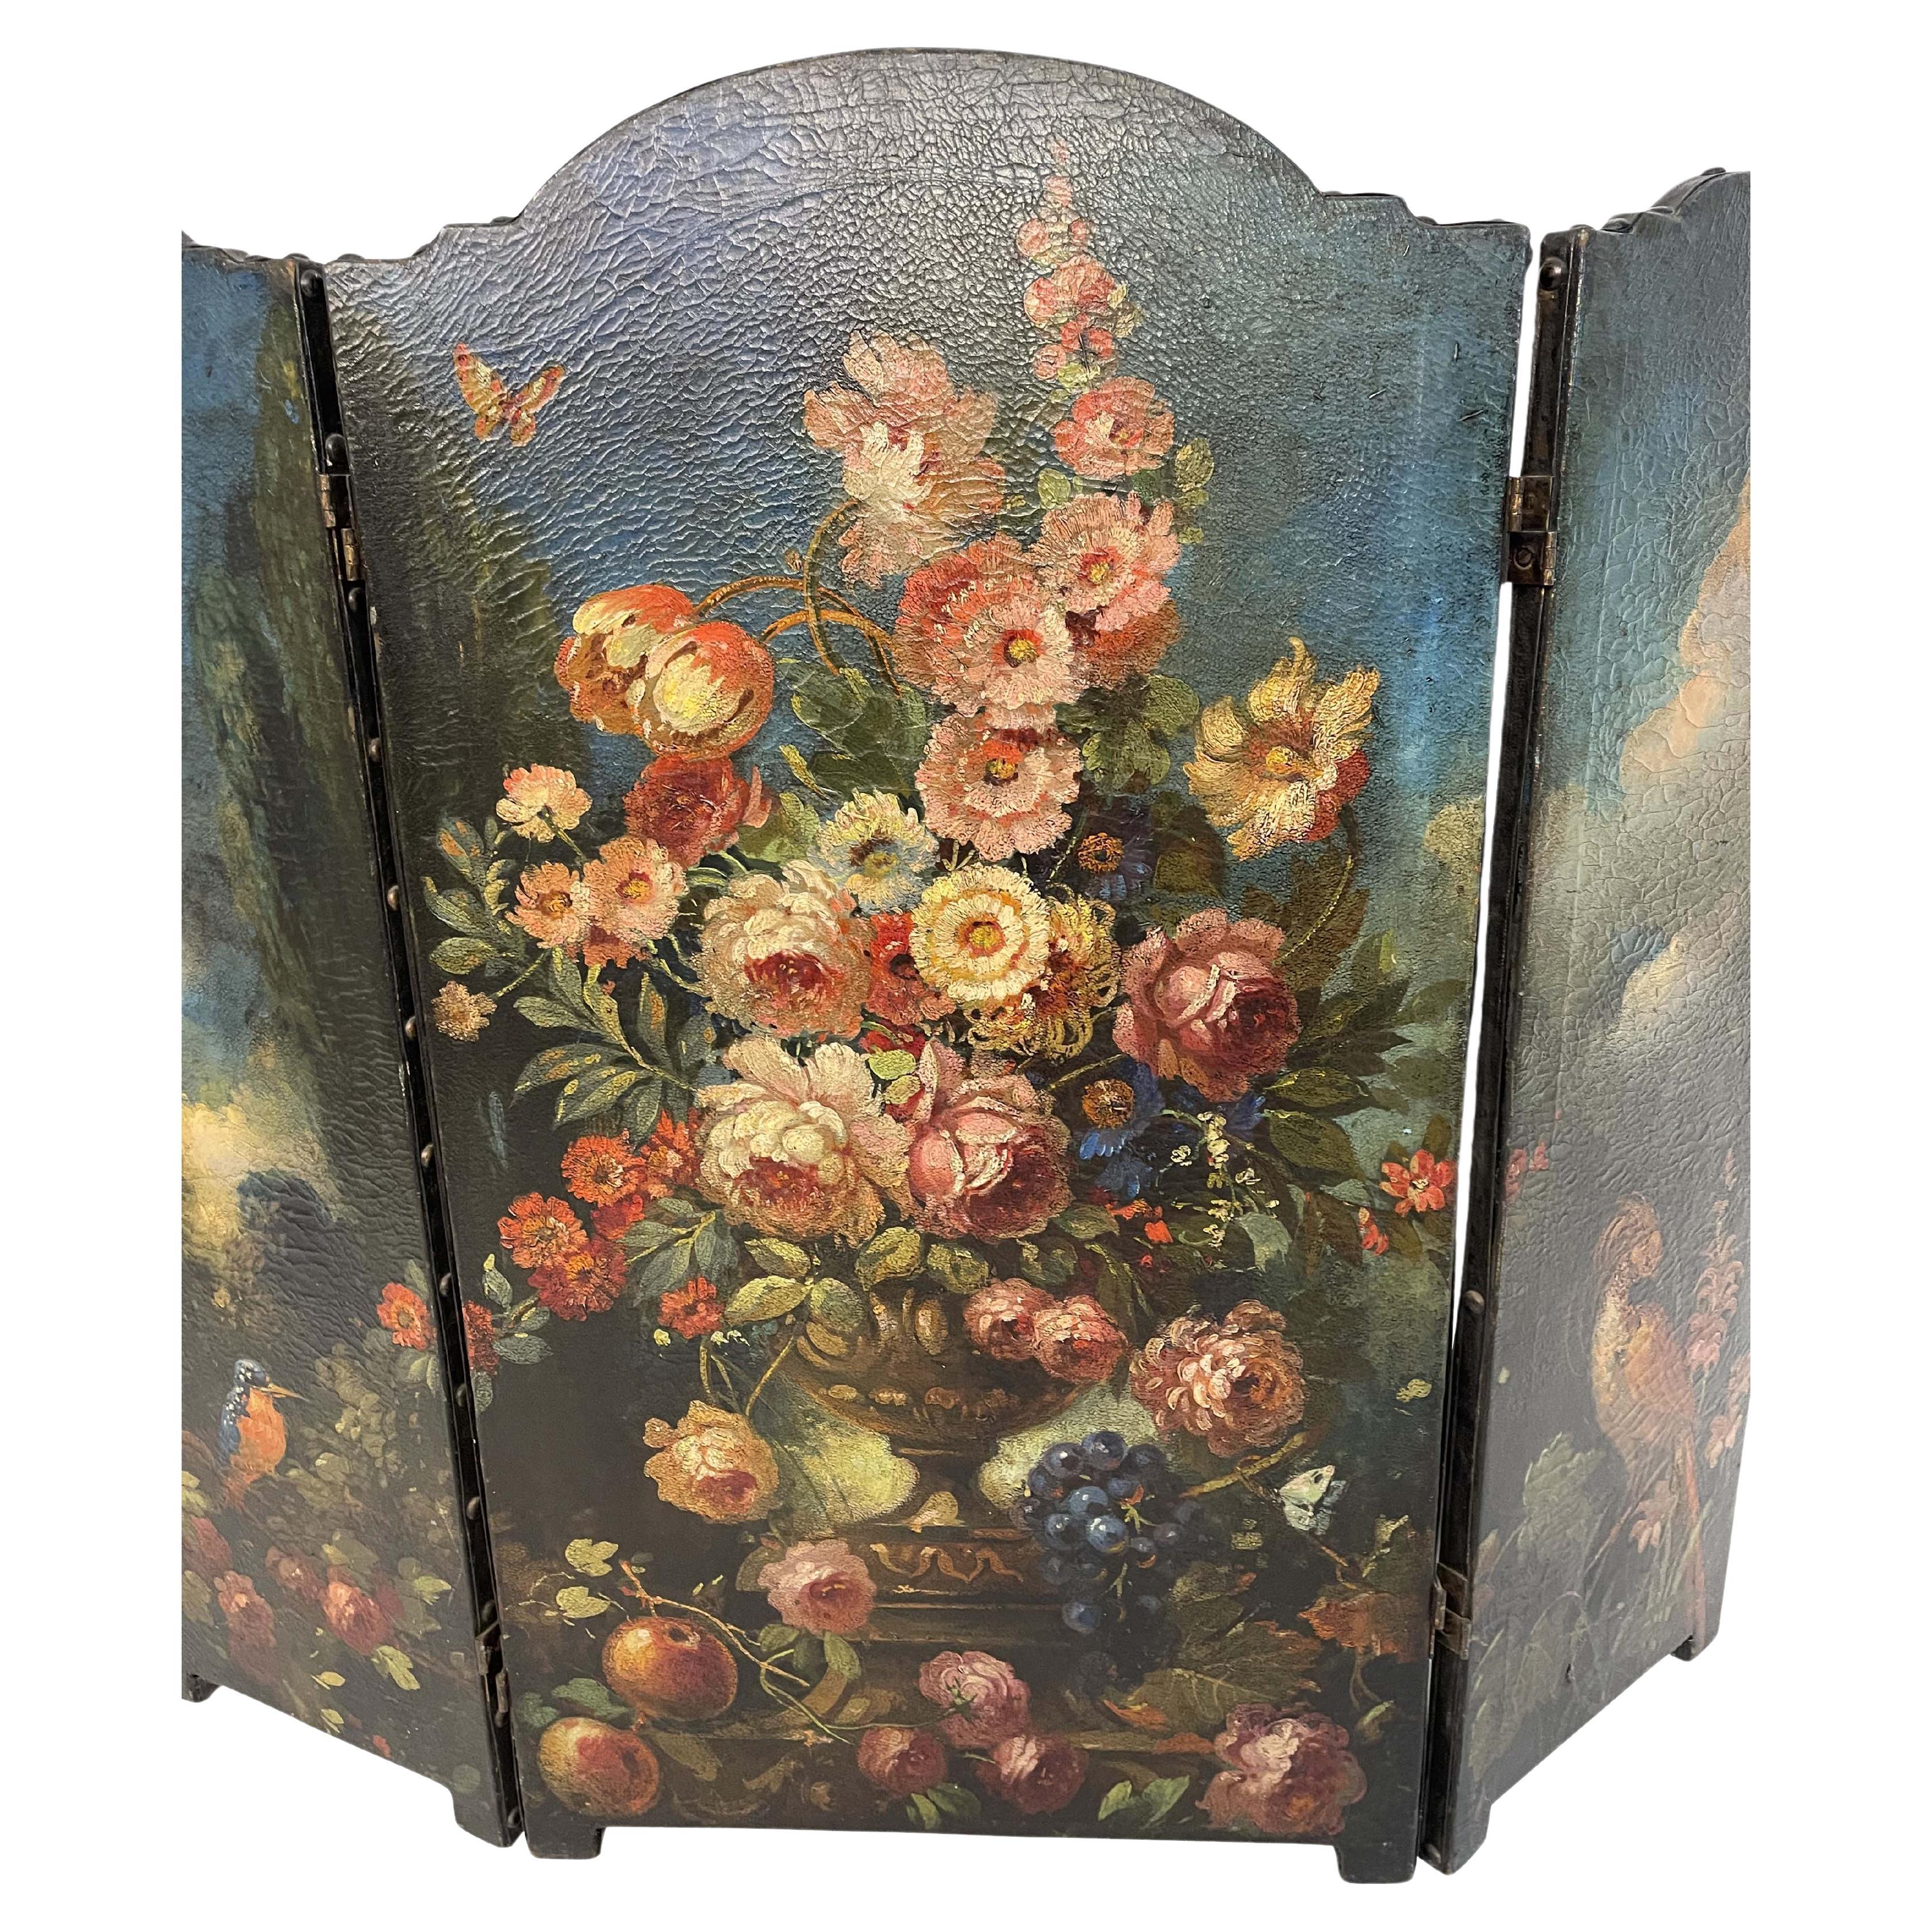 Antique Hand-Painted Floral Leather Fire Screen
Beautifully hand-painted floral bouquets on all 3 sides of this original leather antique fire screen.  A lovely blue background with skies of puffy white clouds, a prominent bouquet of roses,